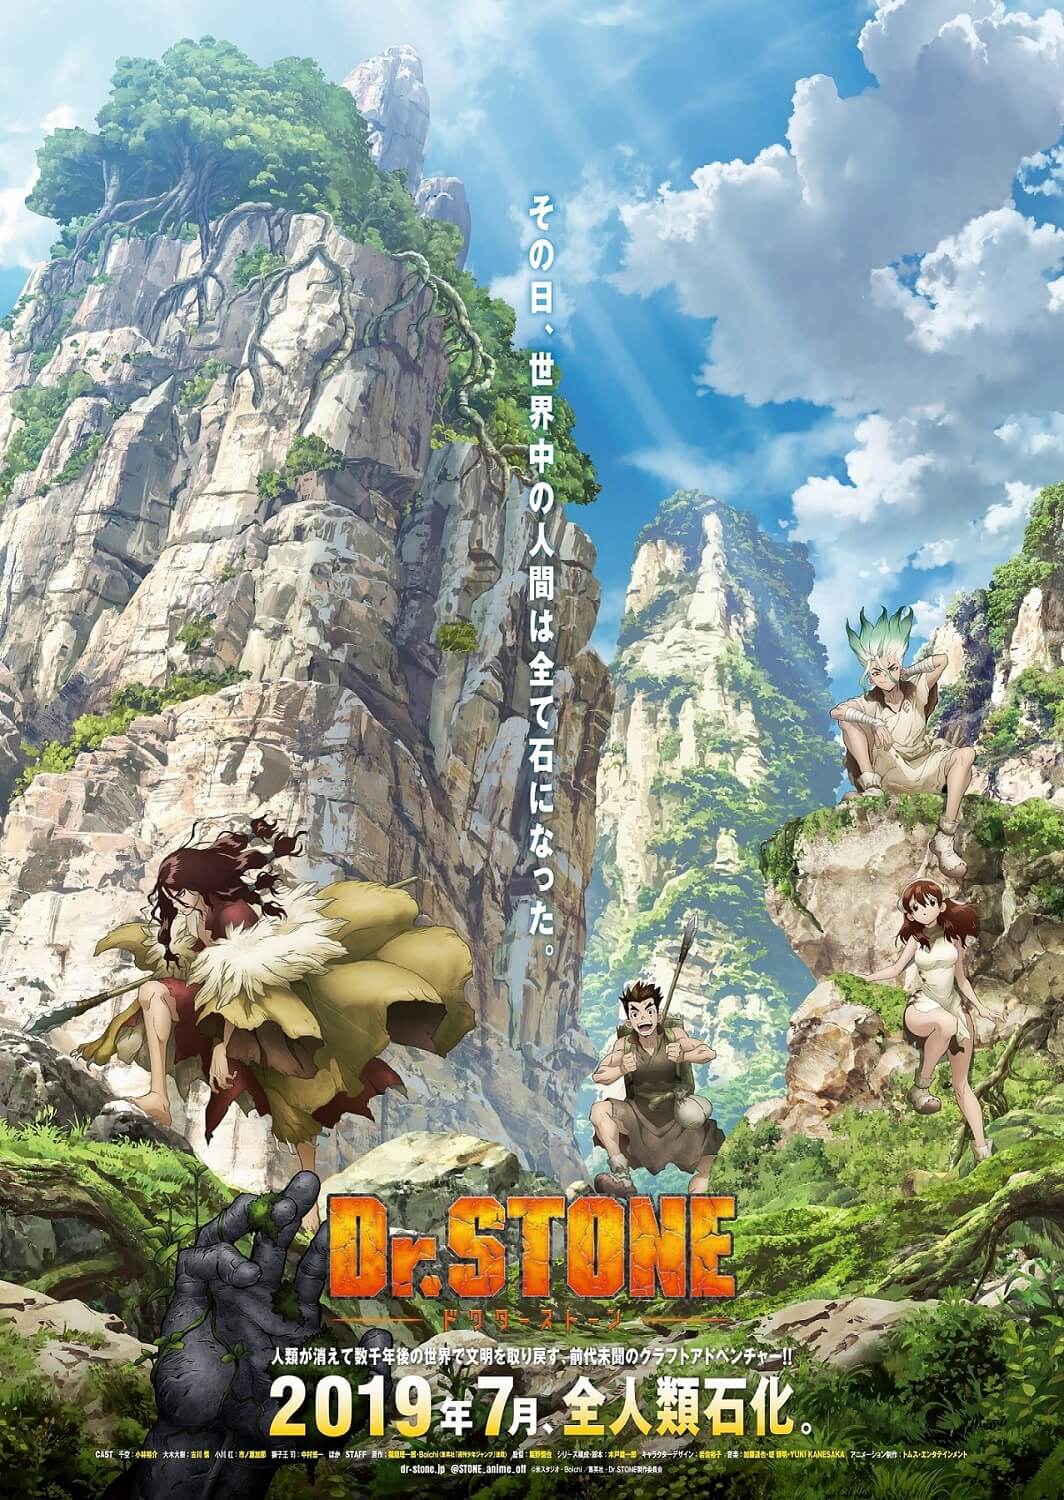 TV Anime Dr. Stone Opening Theme to be Performed